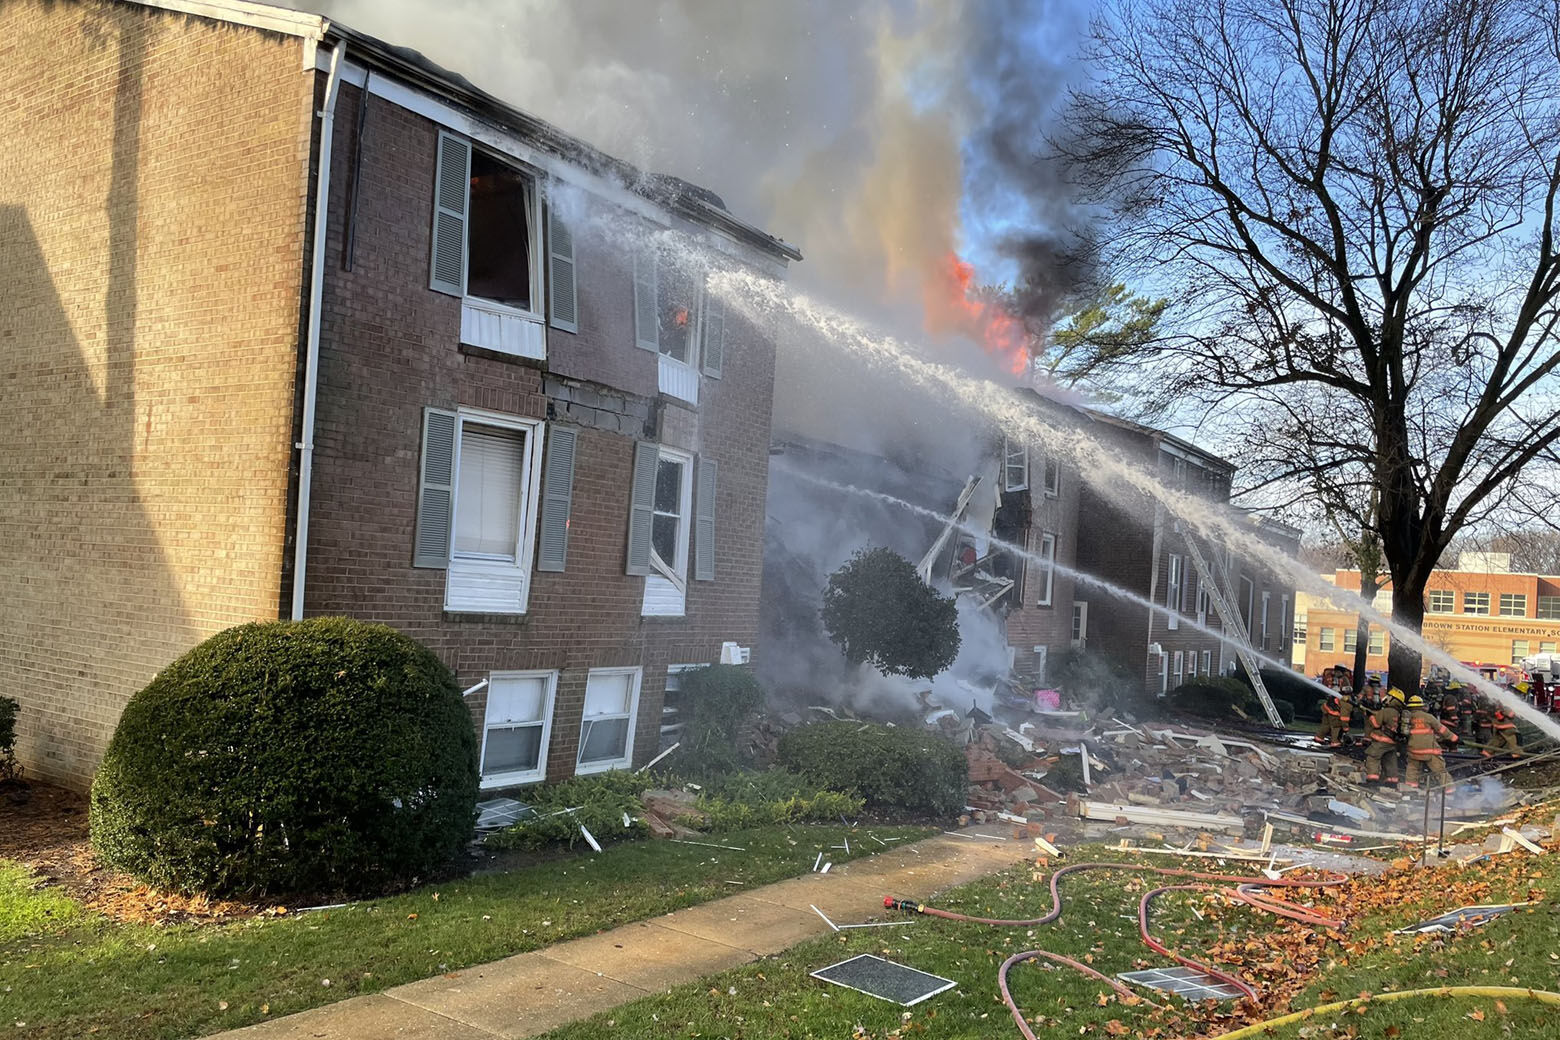 Montgomery County, Maryland, fire department officials say they are responding to a fire and explosion at a building in Gaithersburg Wednesday morning.(Courtesy Montgomery County Fire and Rescue)